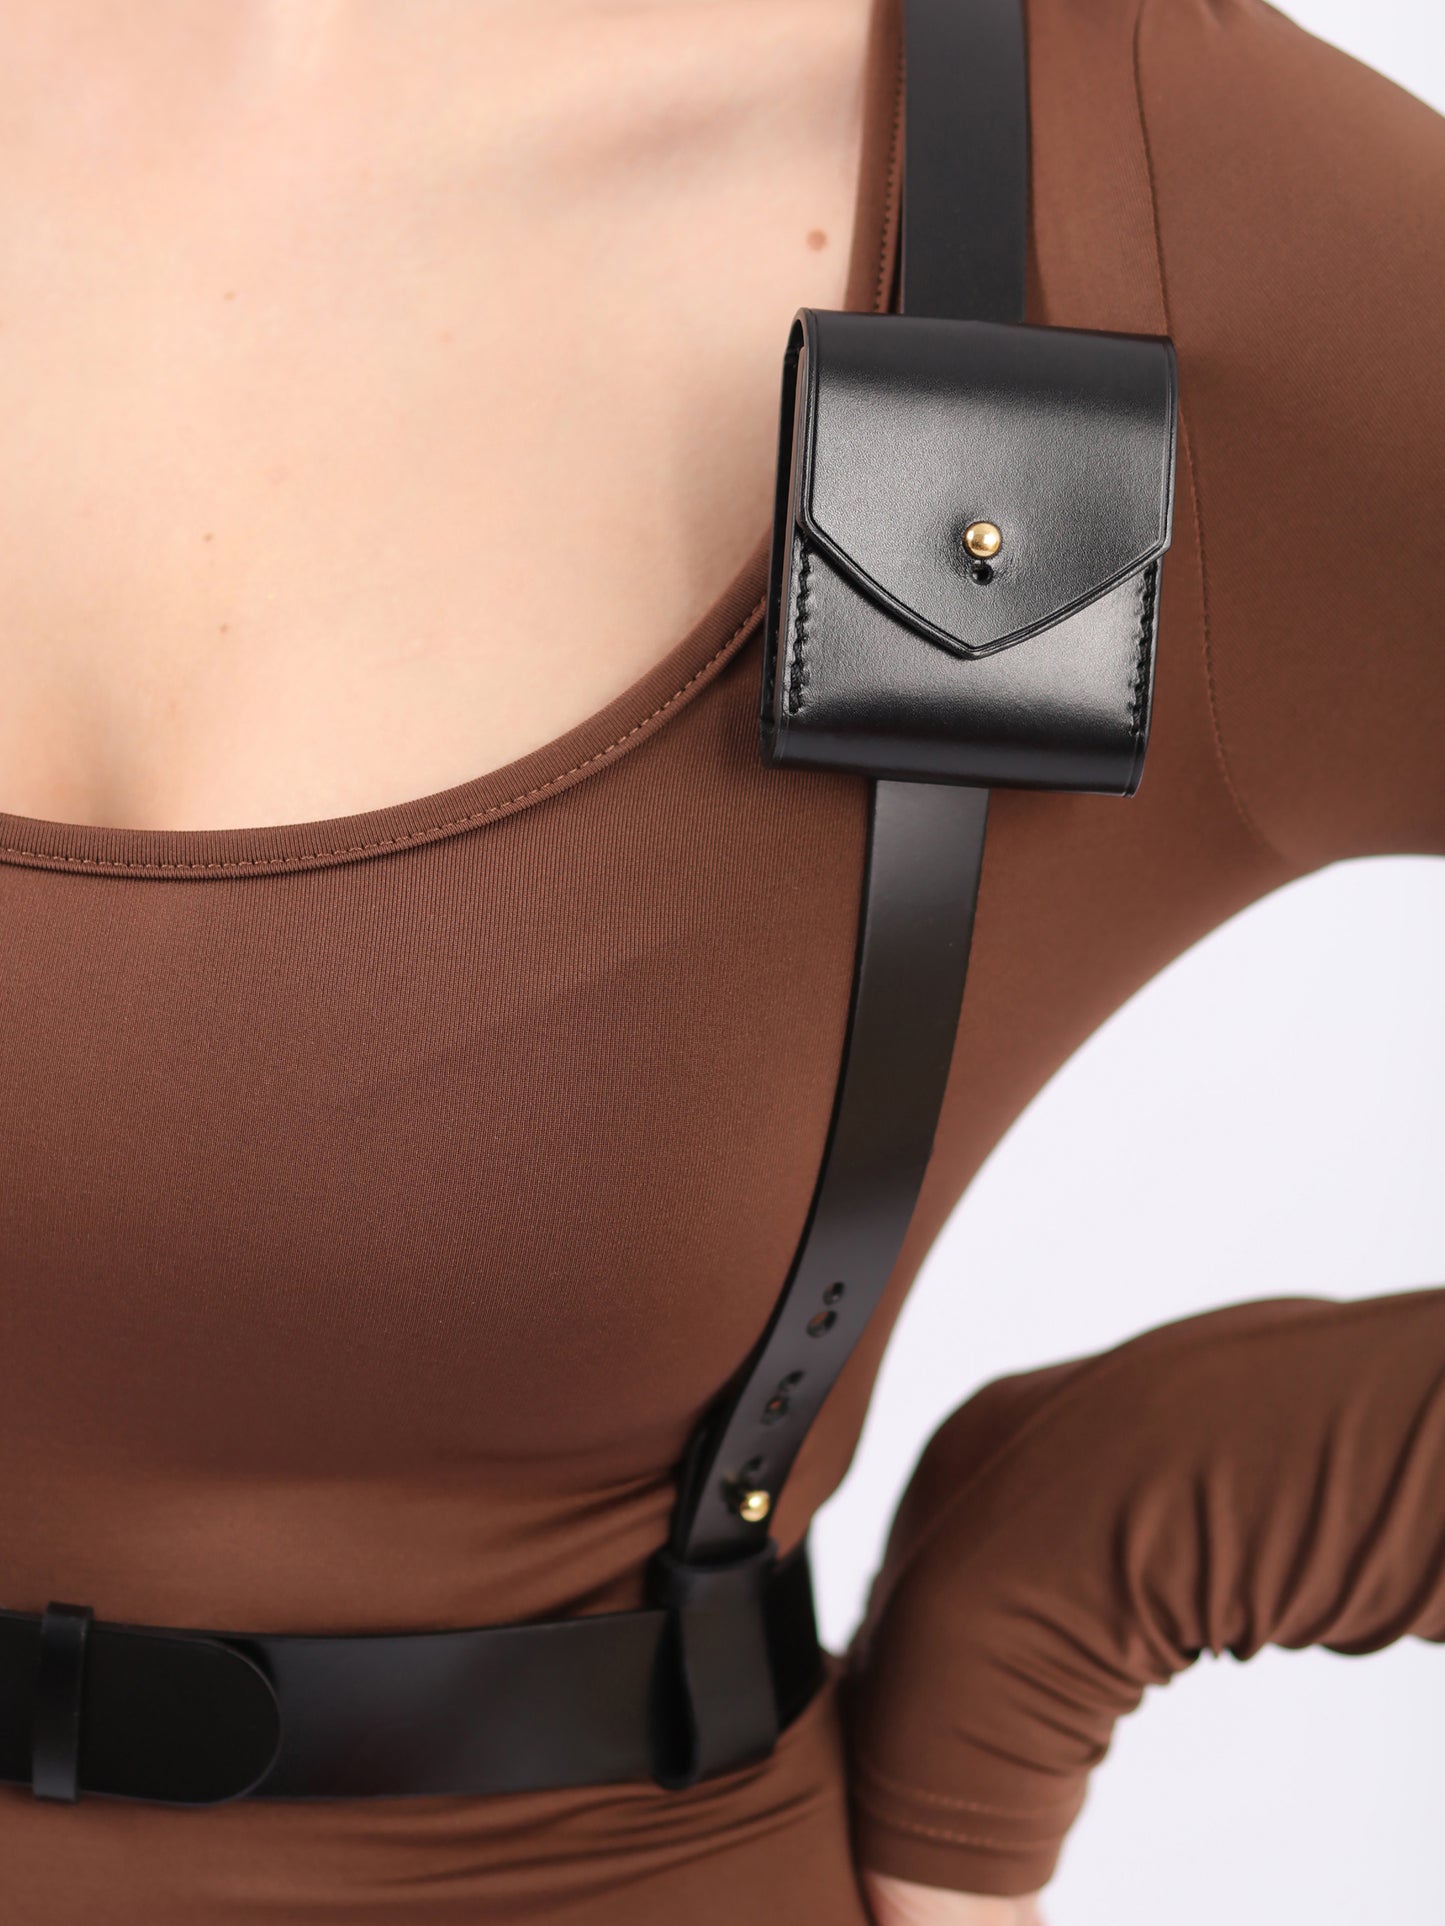 Detailed view of leather pocket harness.